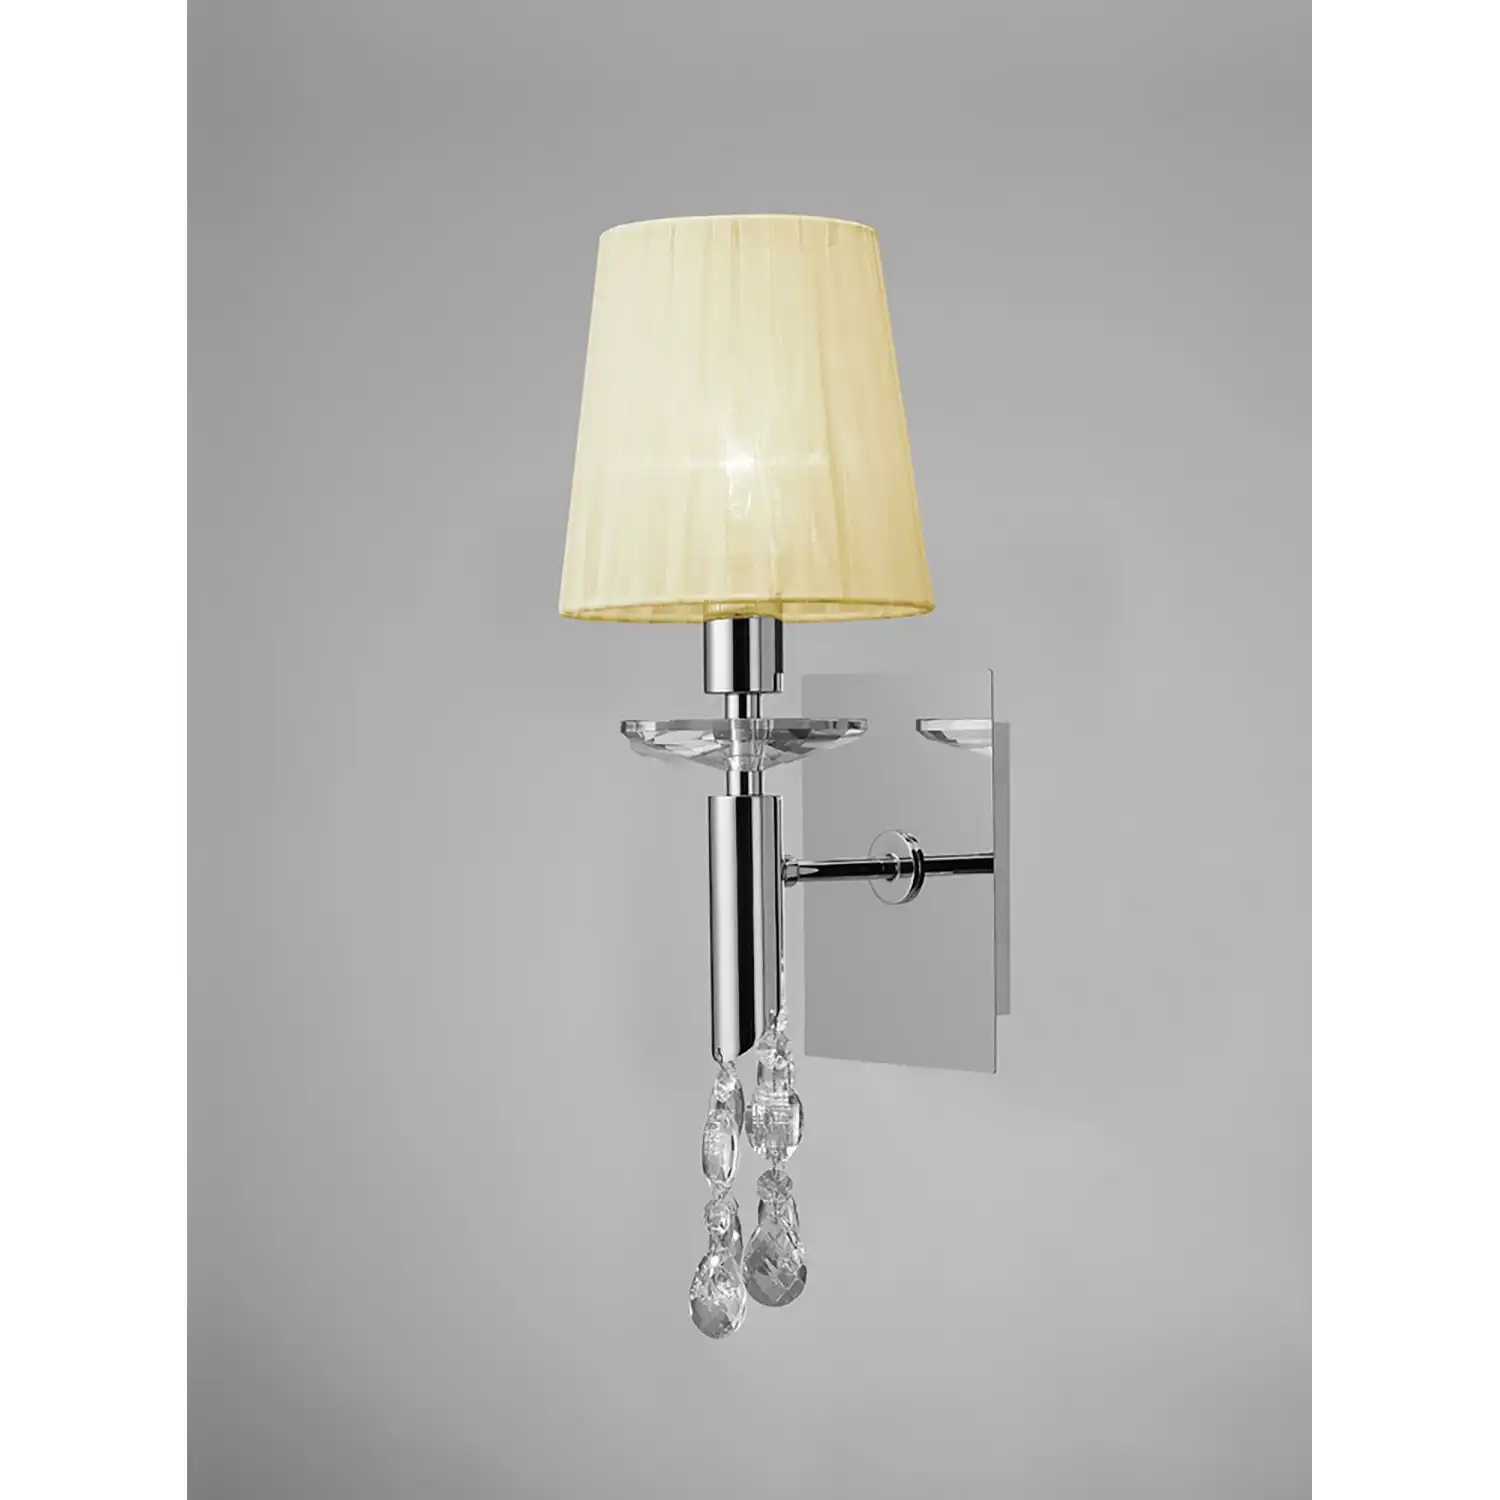 Tiffany Wall Lamp Switched 1+1 Light E14+G9, Polished Chrome With Cream Shade And Clear Crystal